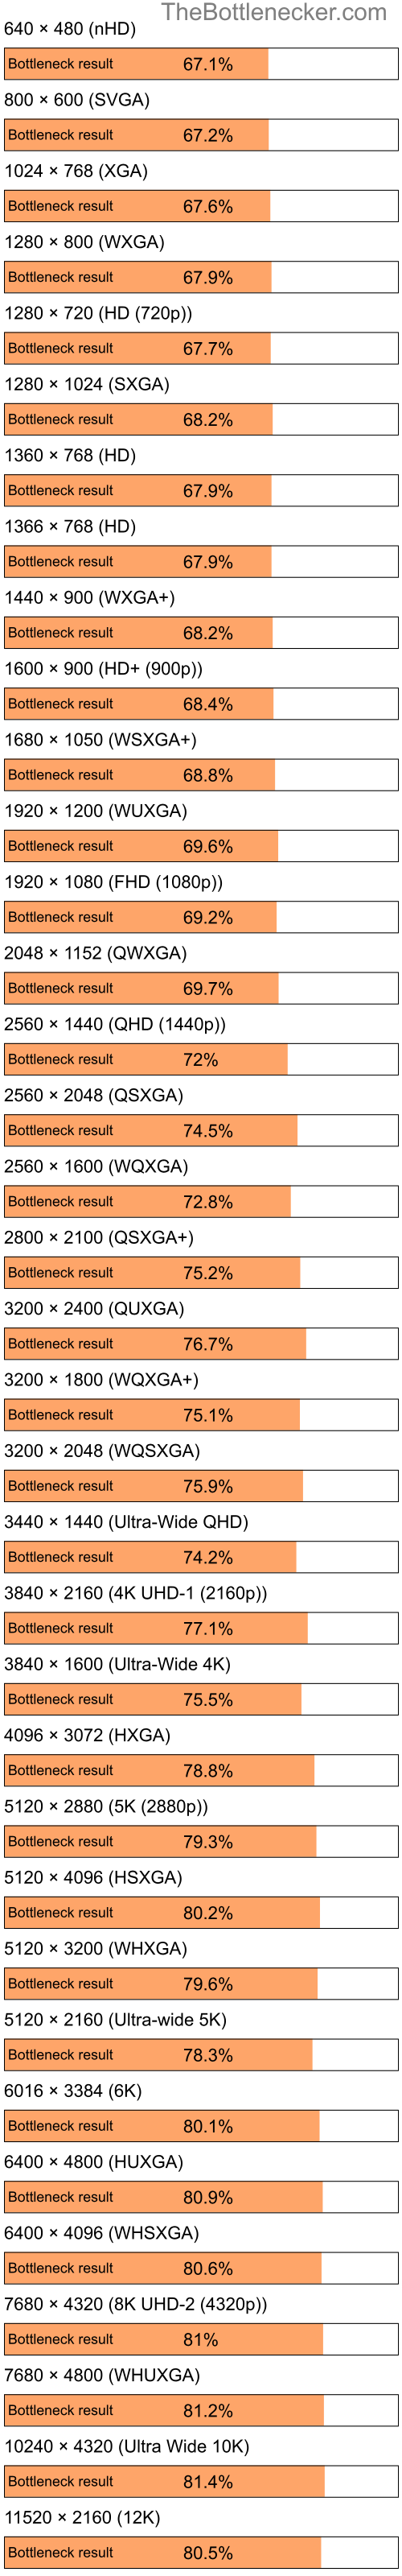 Bottleneck results by resolution for Intel Pentium 4 and AMD Radeon HD 2350 in General Tasks